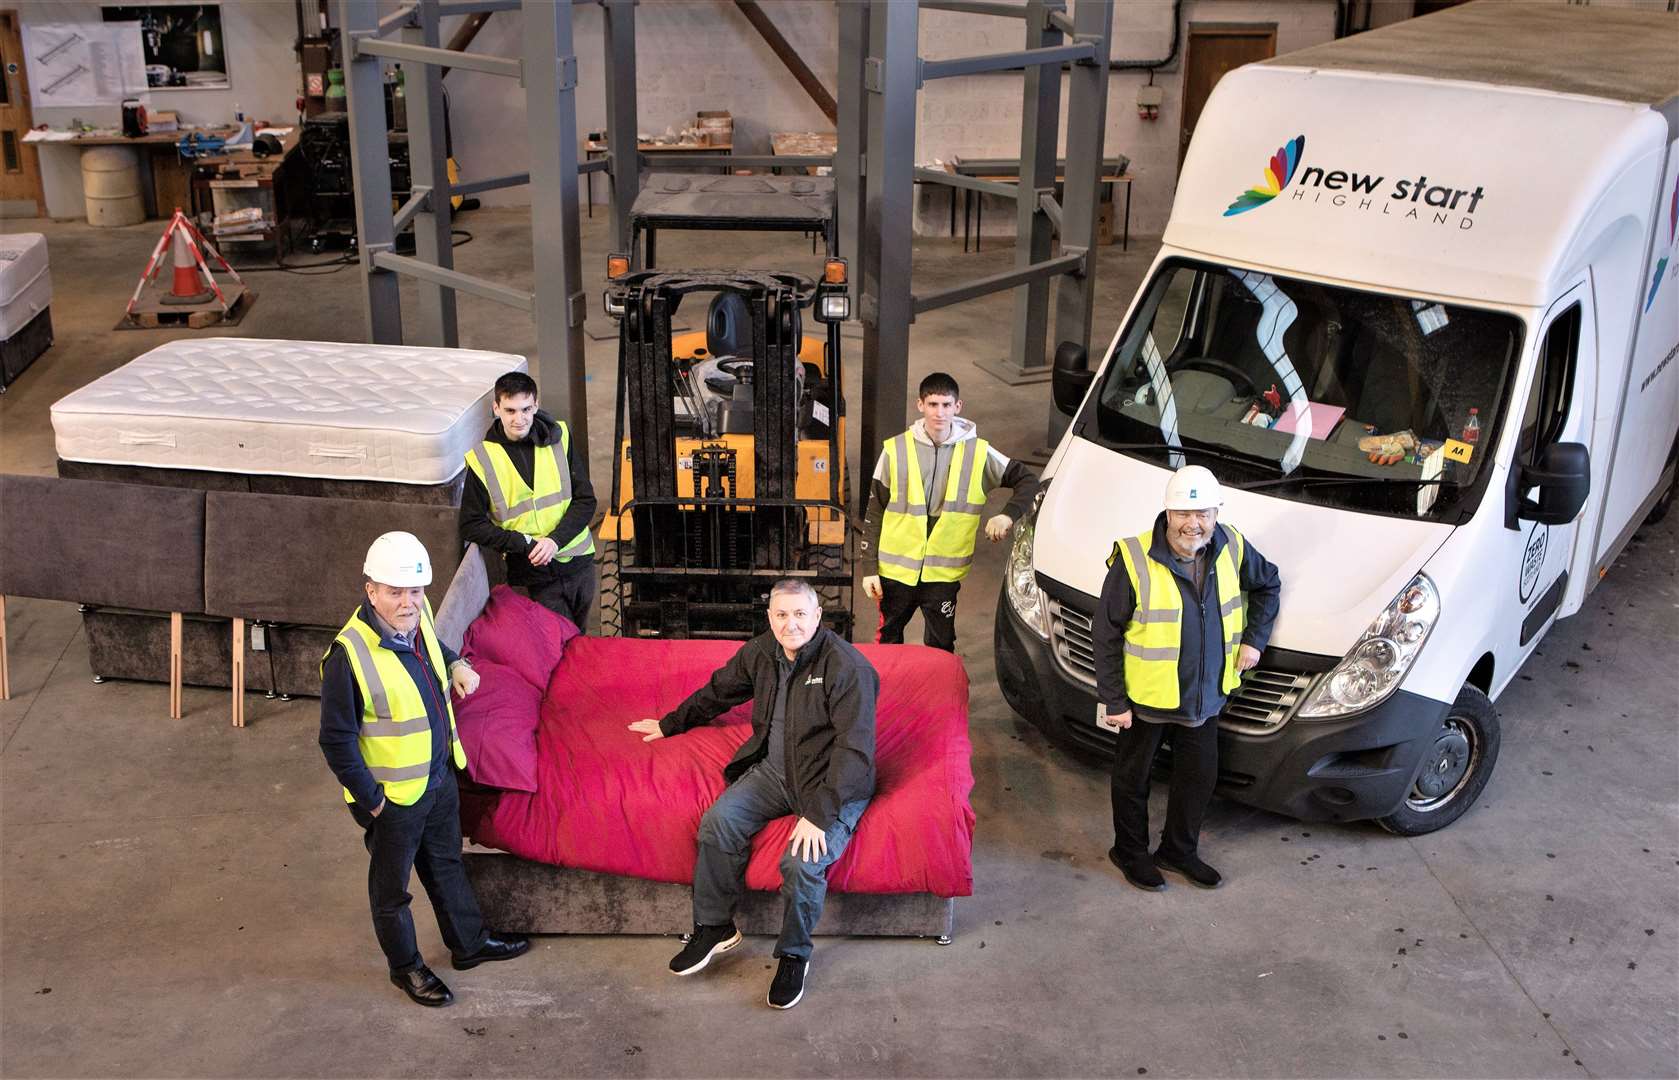 At front from left are Brendan Brankin, JFN Bower facility manager, Ally Waugh from New Start Highland sits on one of the donated beds and next to him is Kenneth Green EHSSQ engineer with JFN. At the rear are Lewis Scott and Dylan Campbell from New Start. Picture: John Baikie